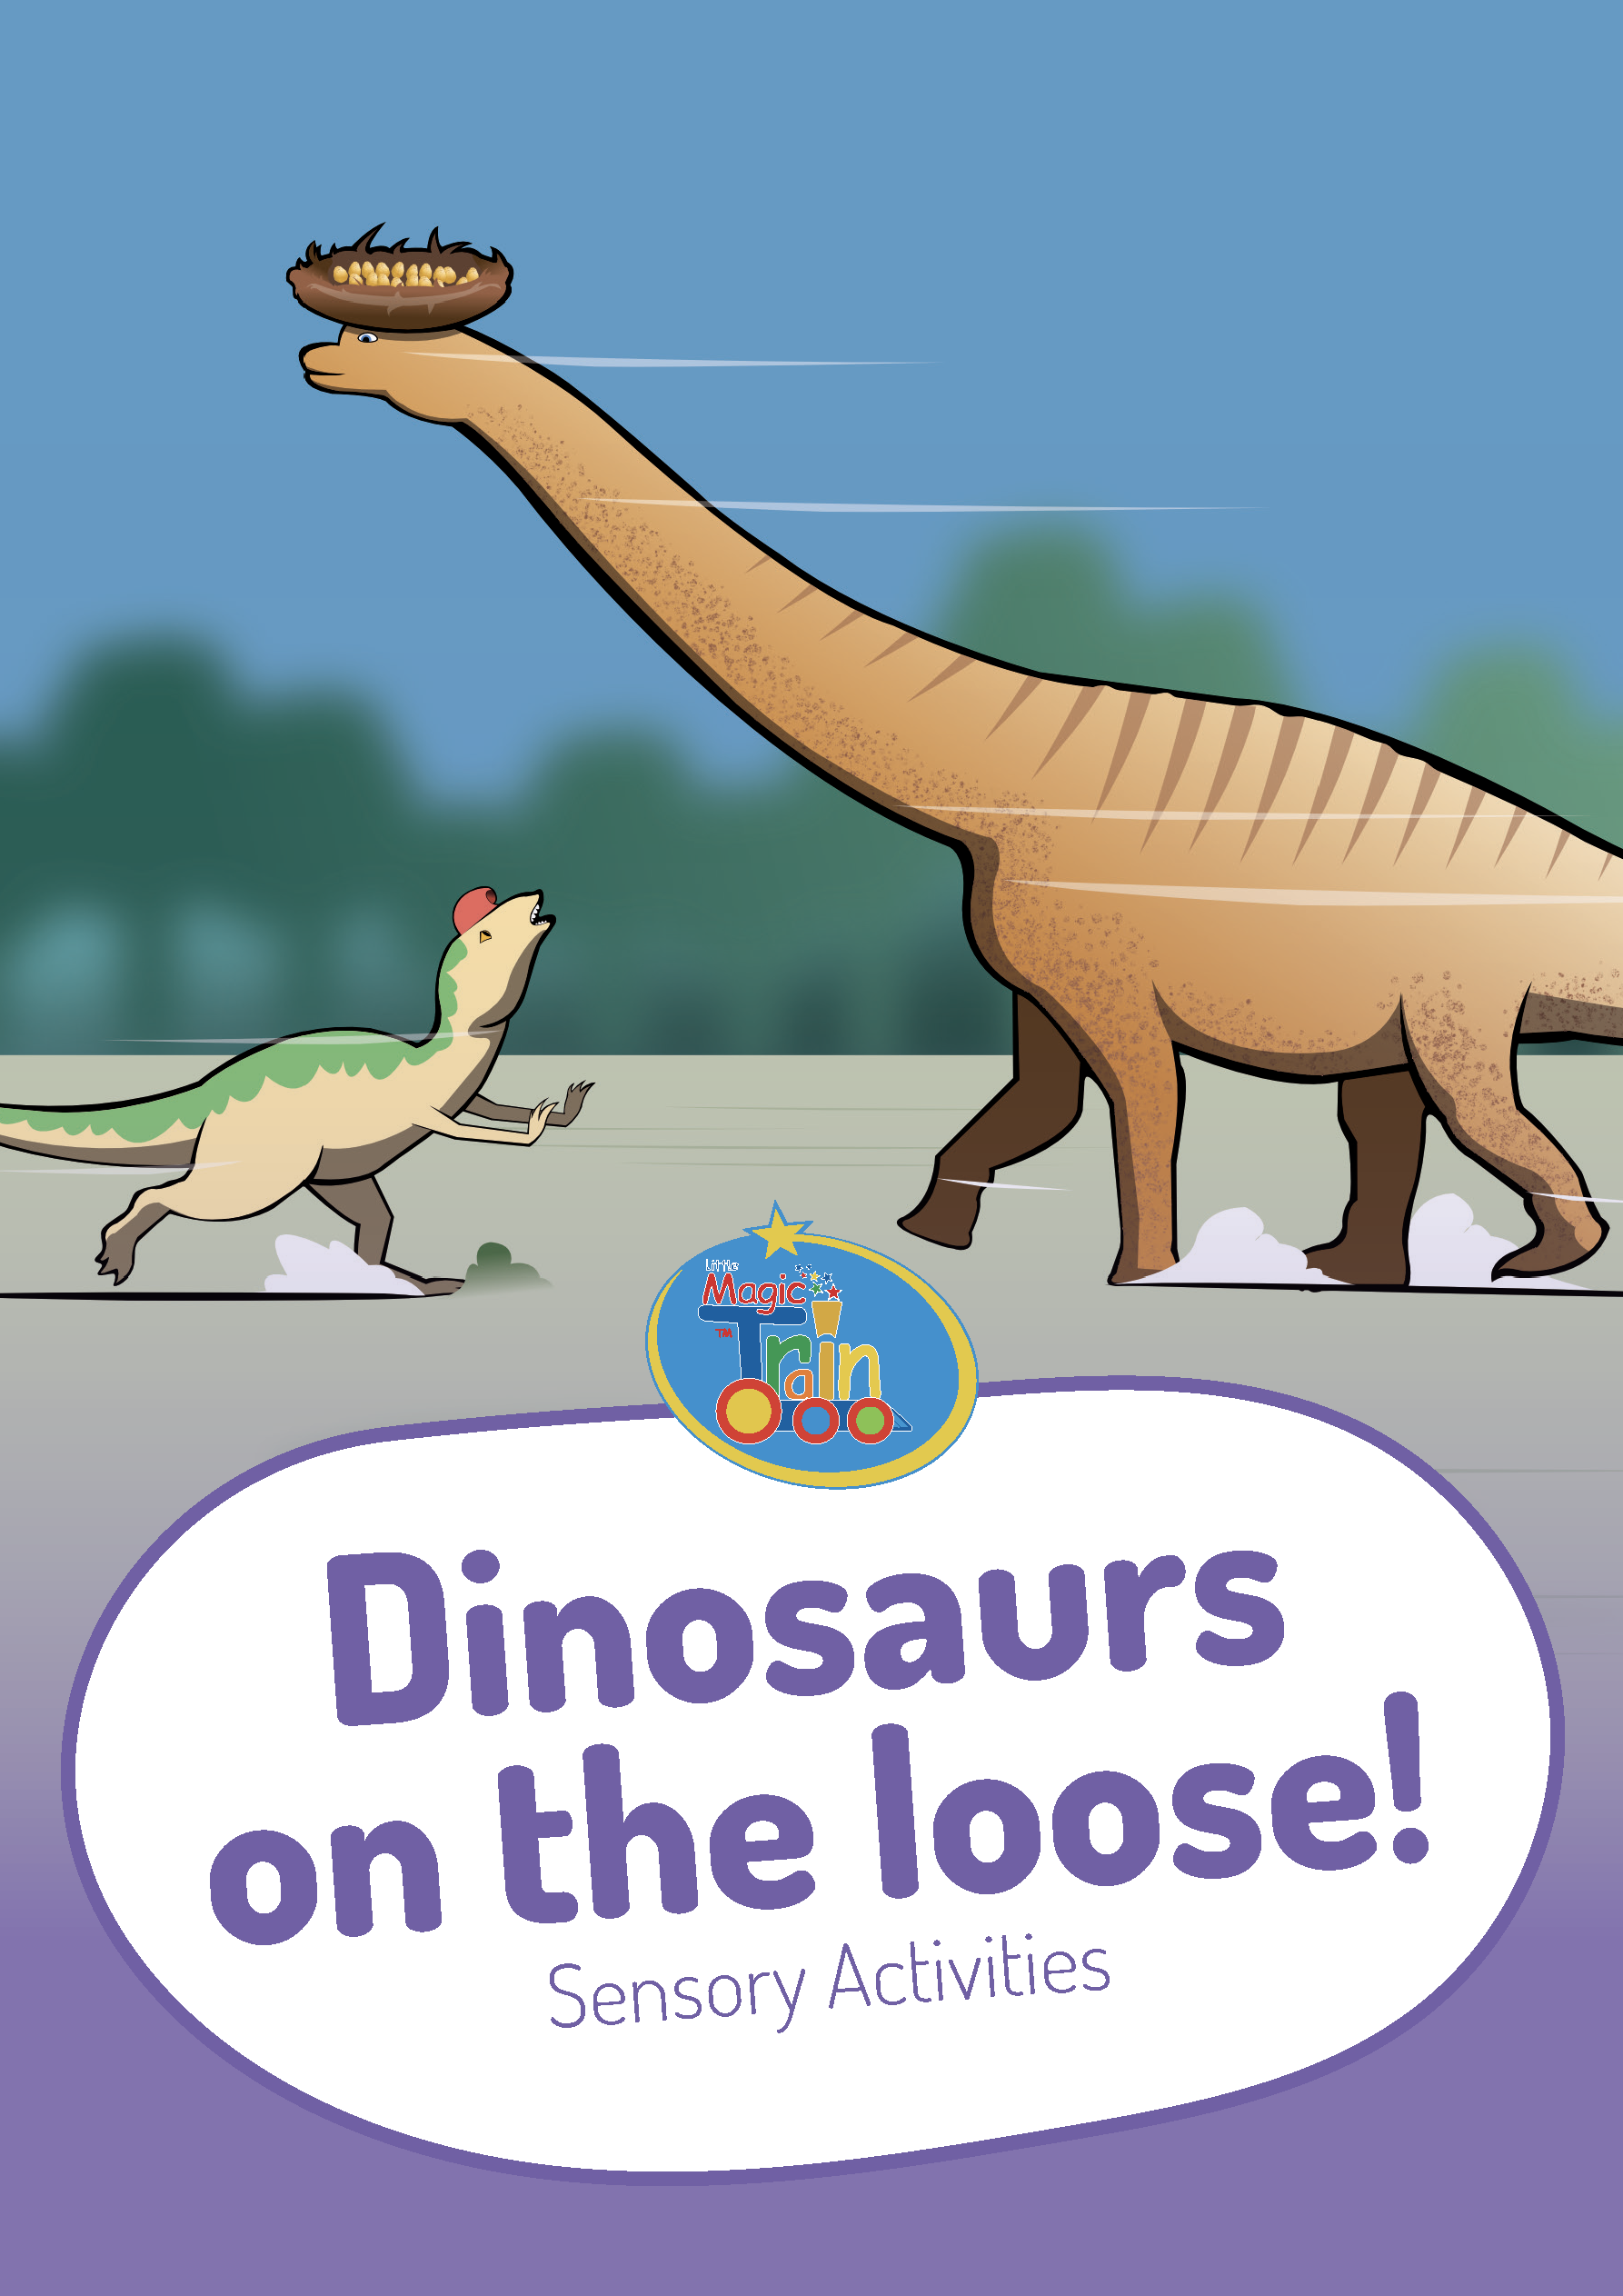 English-Sensory-activities-dinosaurs-on-the-loose_Page_01